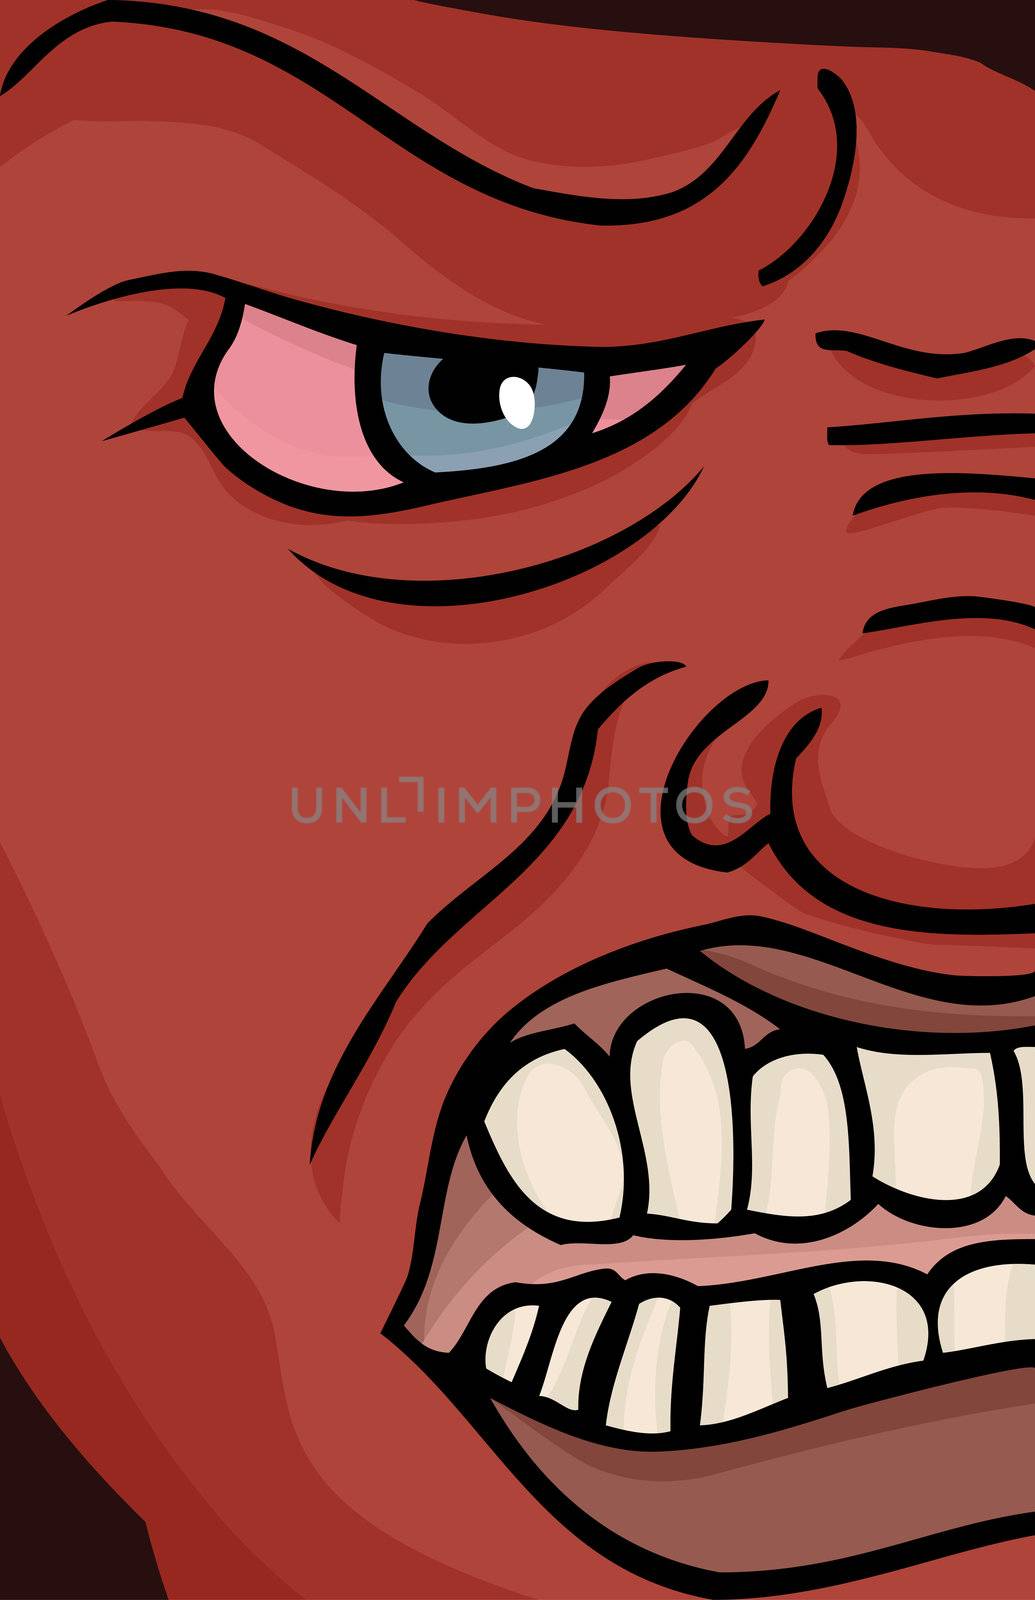 Enraged Face by TheBlackRhino